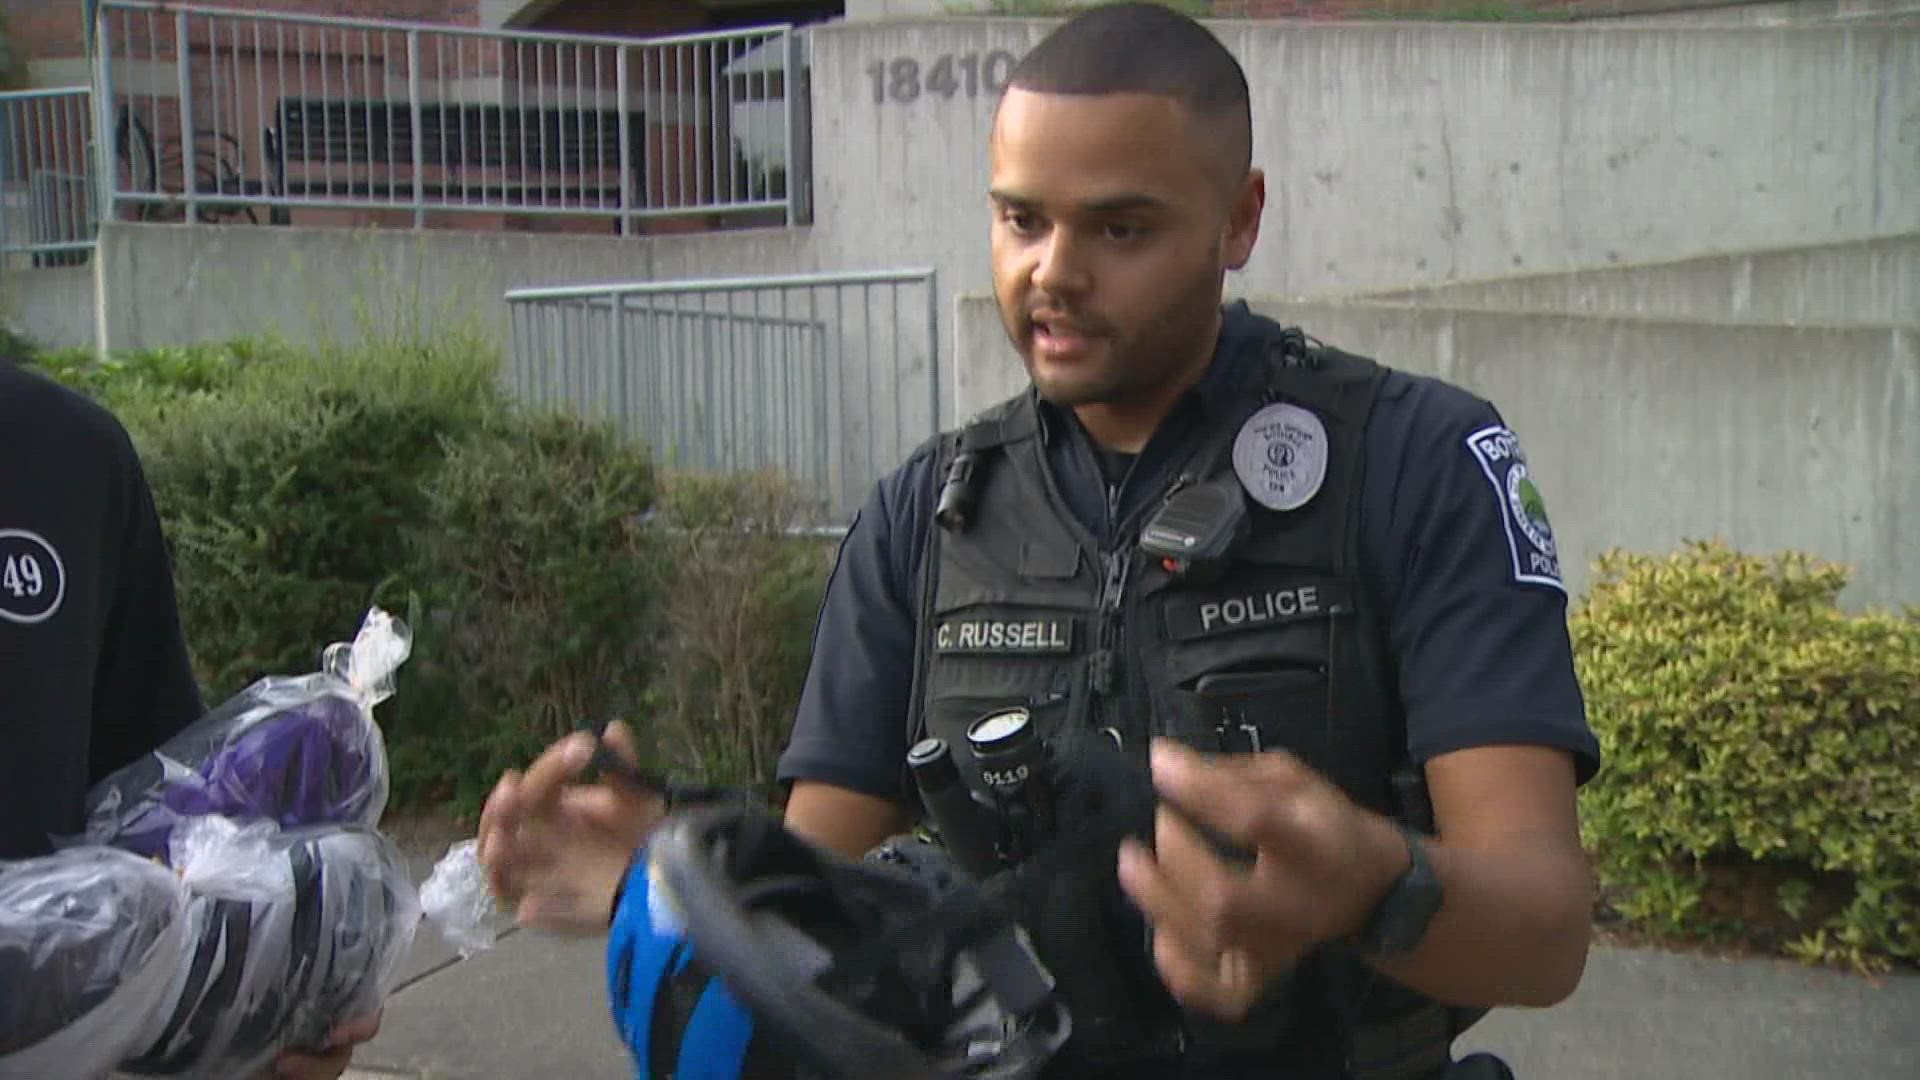 A Bothell police officer gave out free bicycle helmets with the help of a man whose story helped generate state funding for helmets.